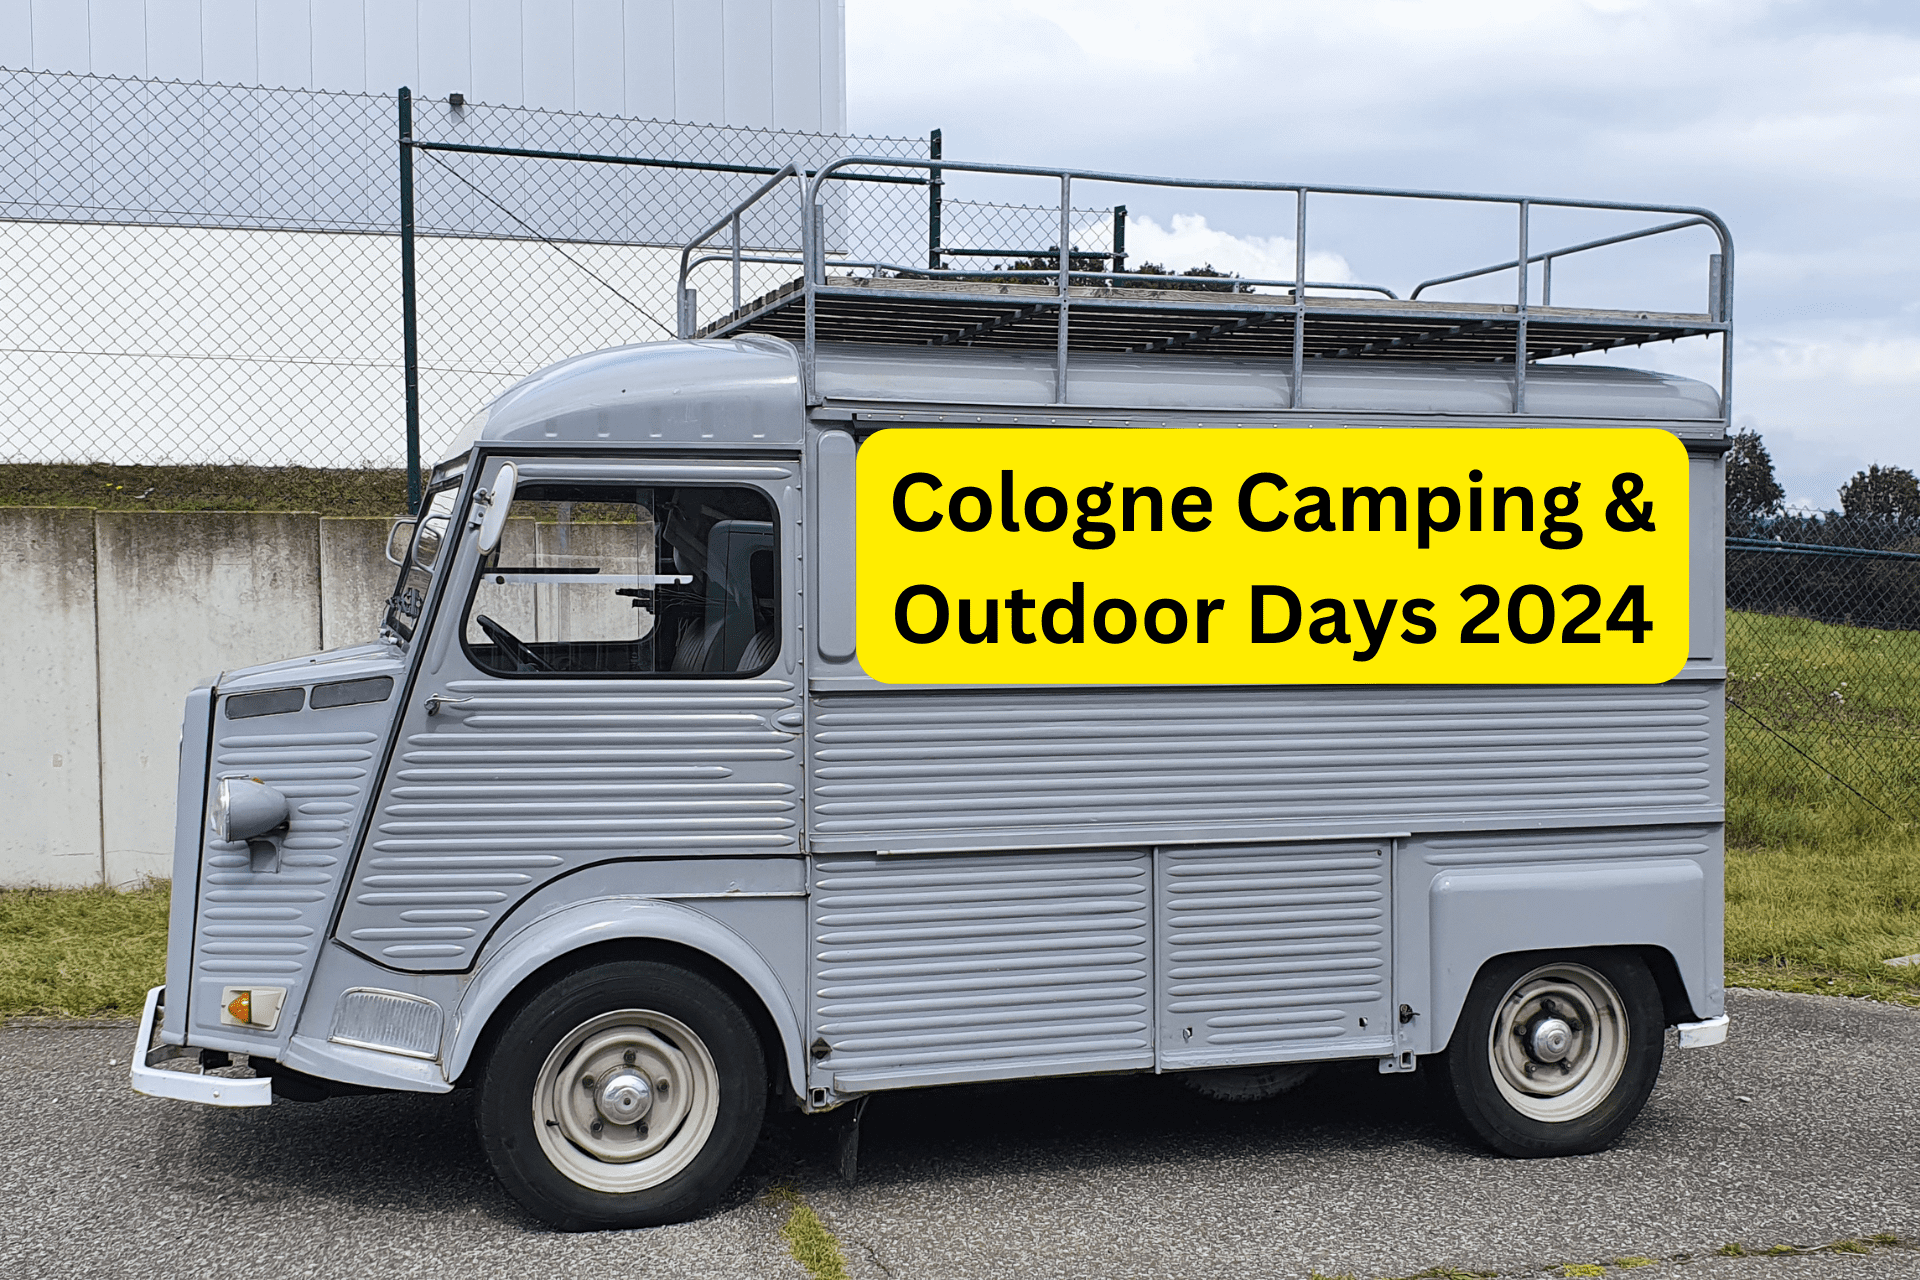 Cologne Camping & Outdoor Days 2024